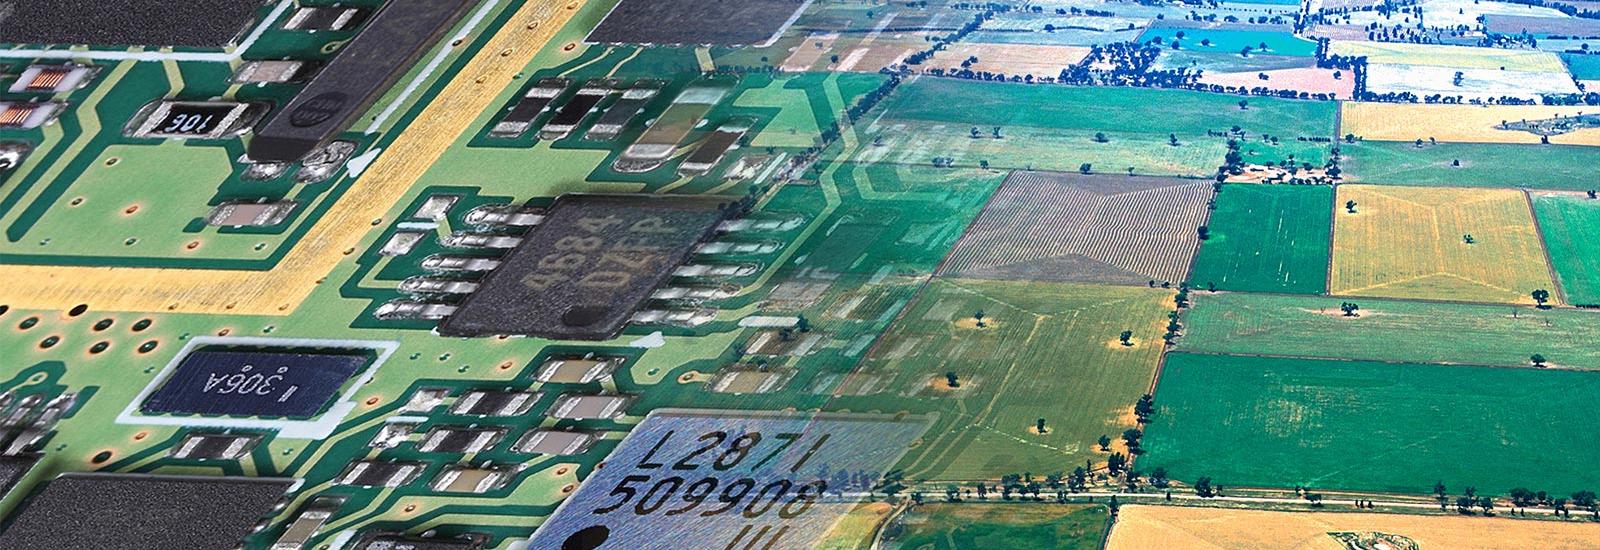 Ariel view of a farm made to look like a computer's motherboard.